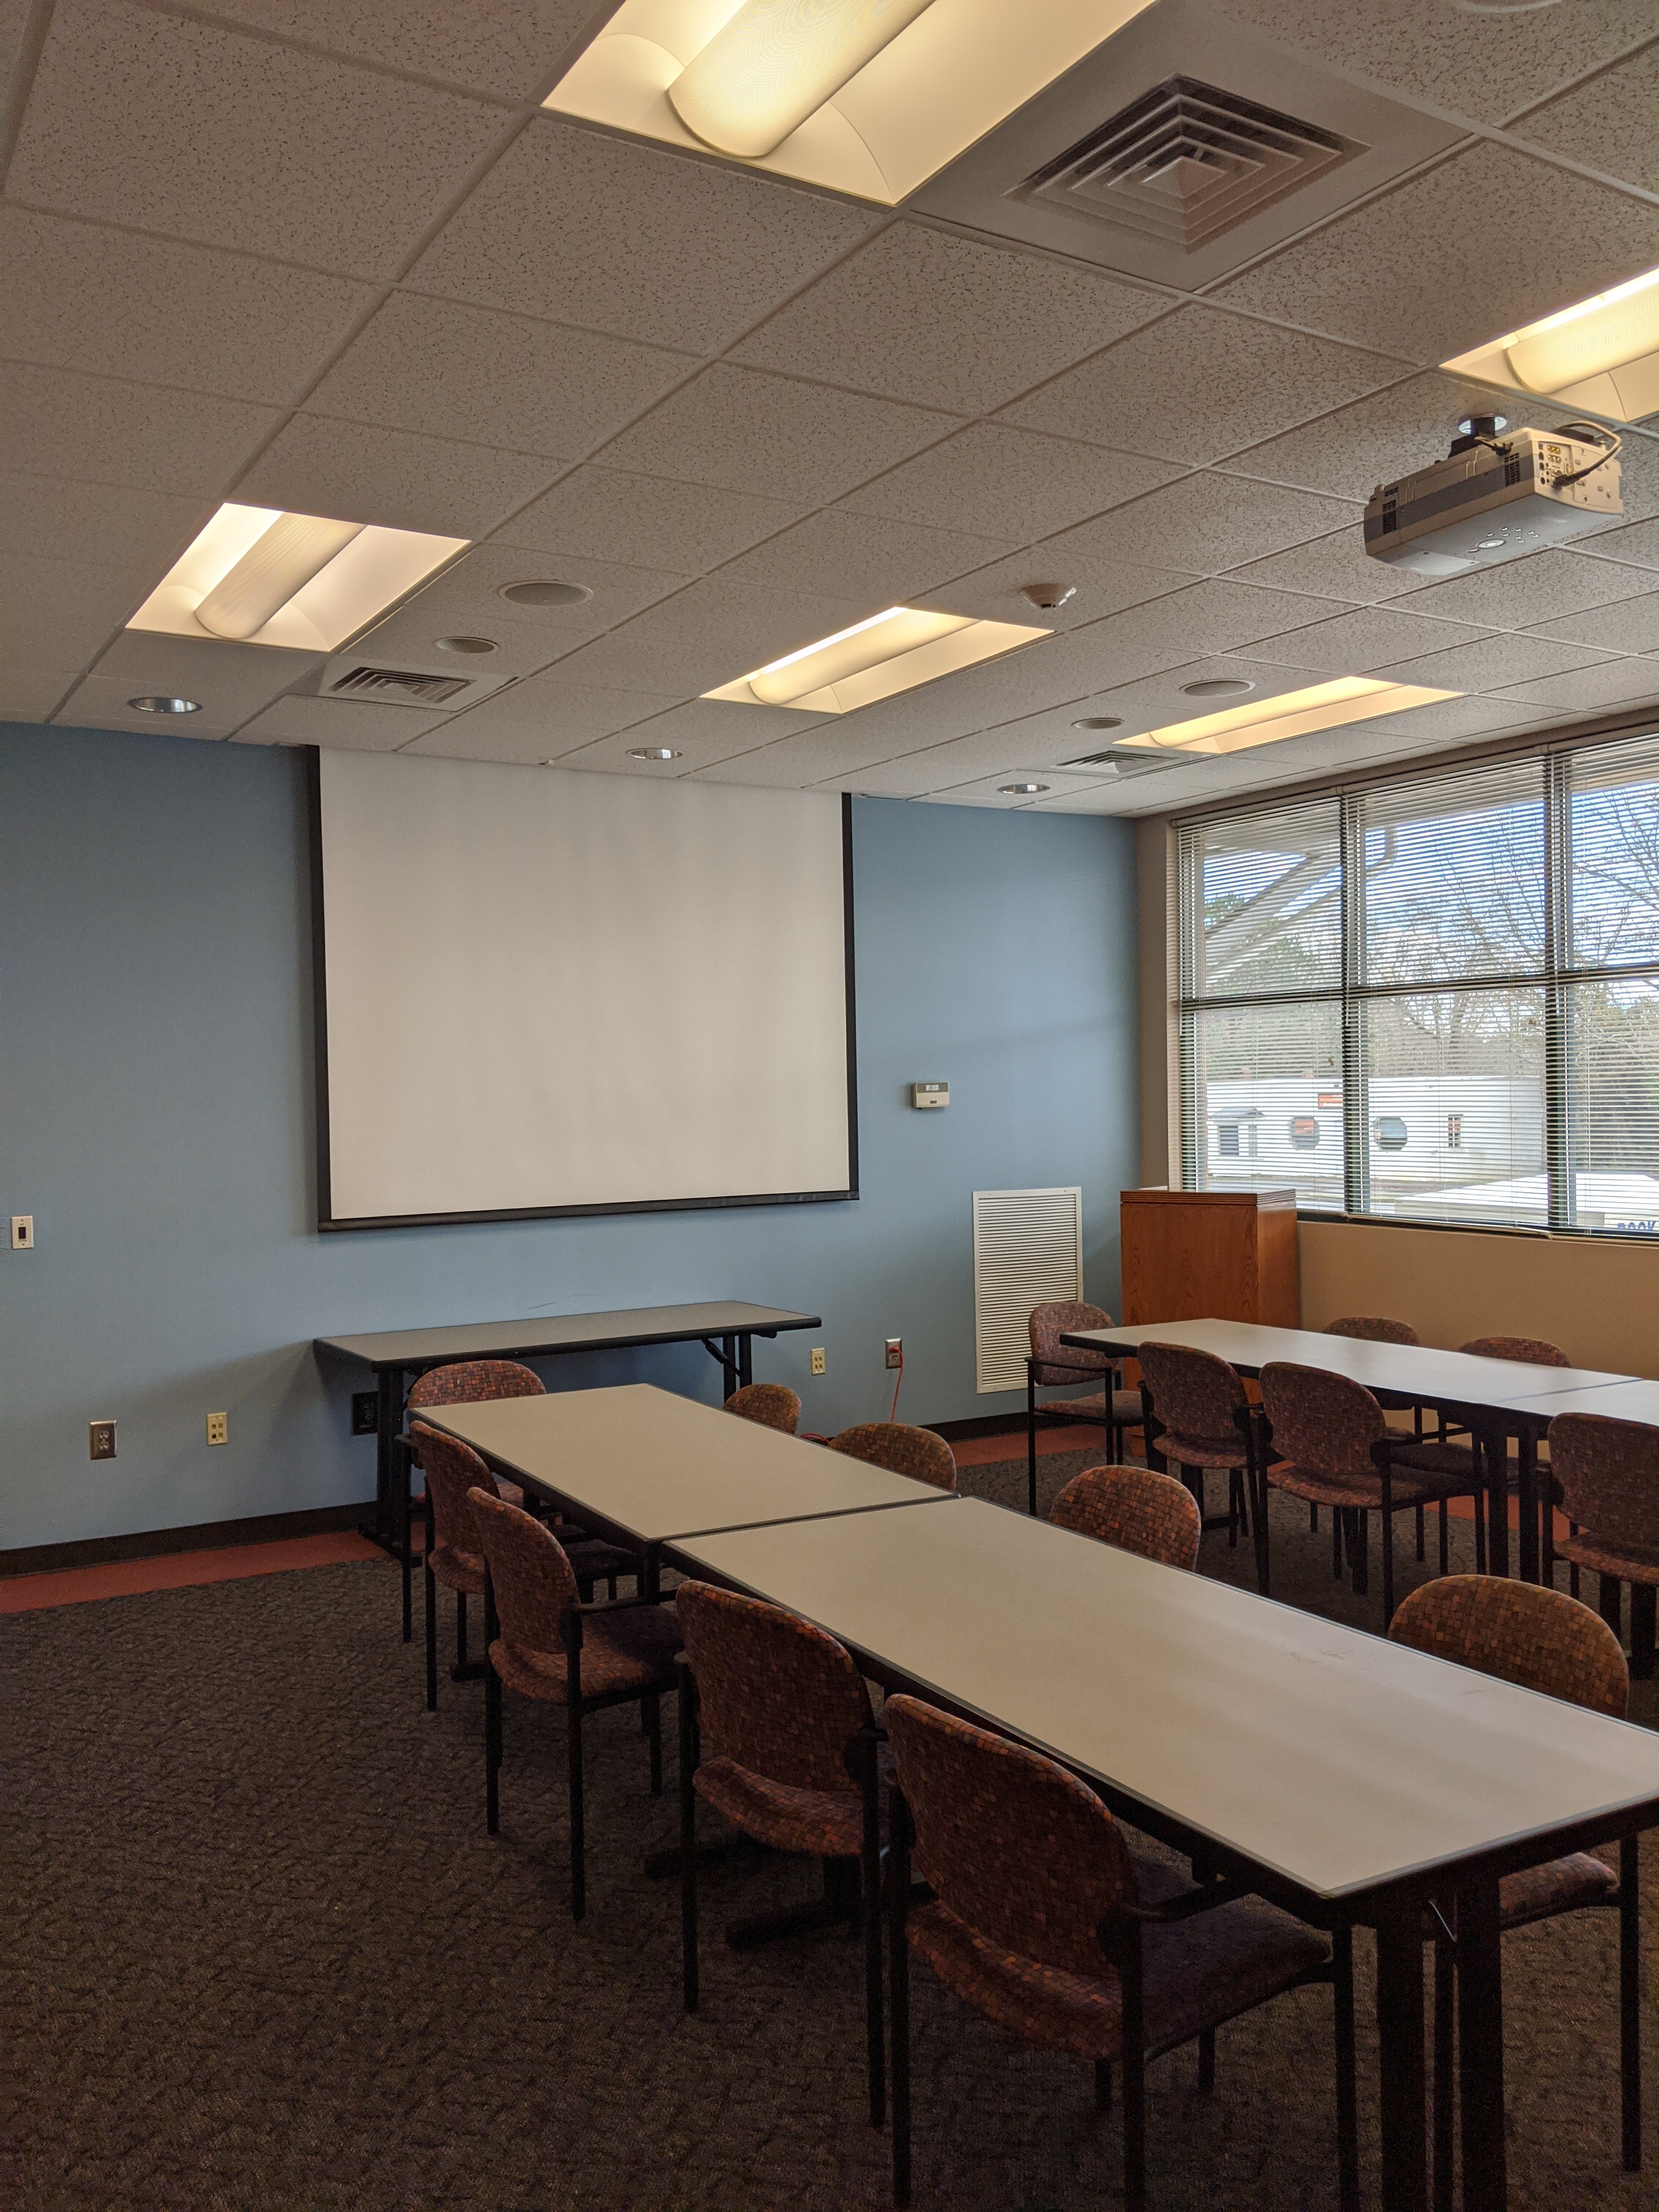 Room photo of the Friends of the Library Meeting Room showing tables placed parallel with a projector screen at the front of the room